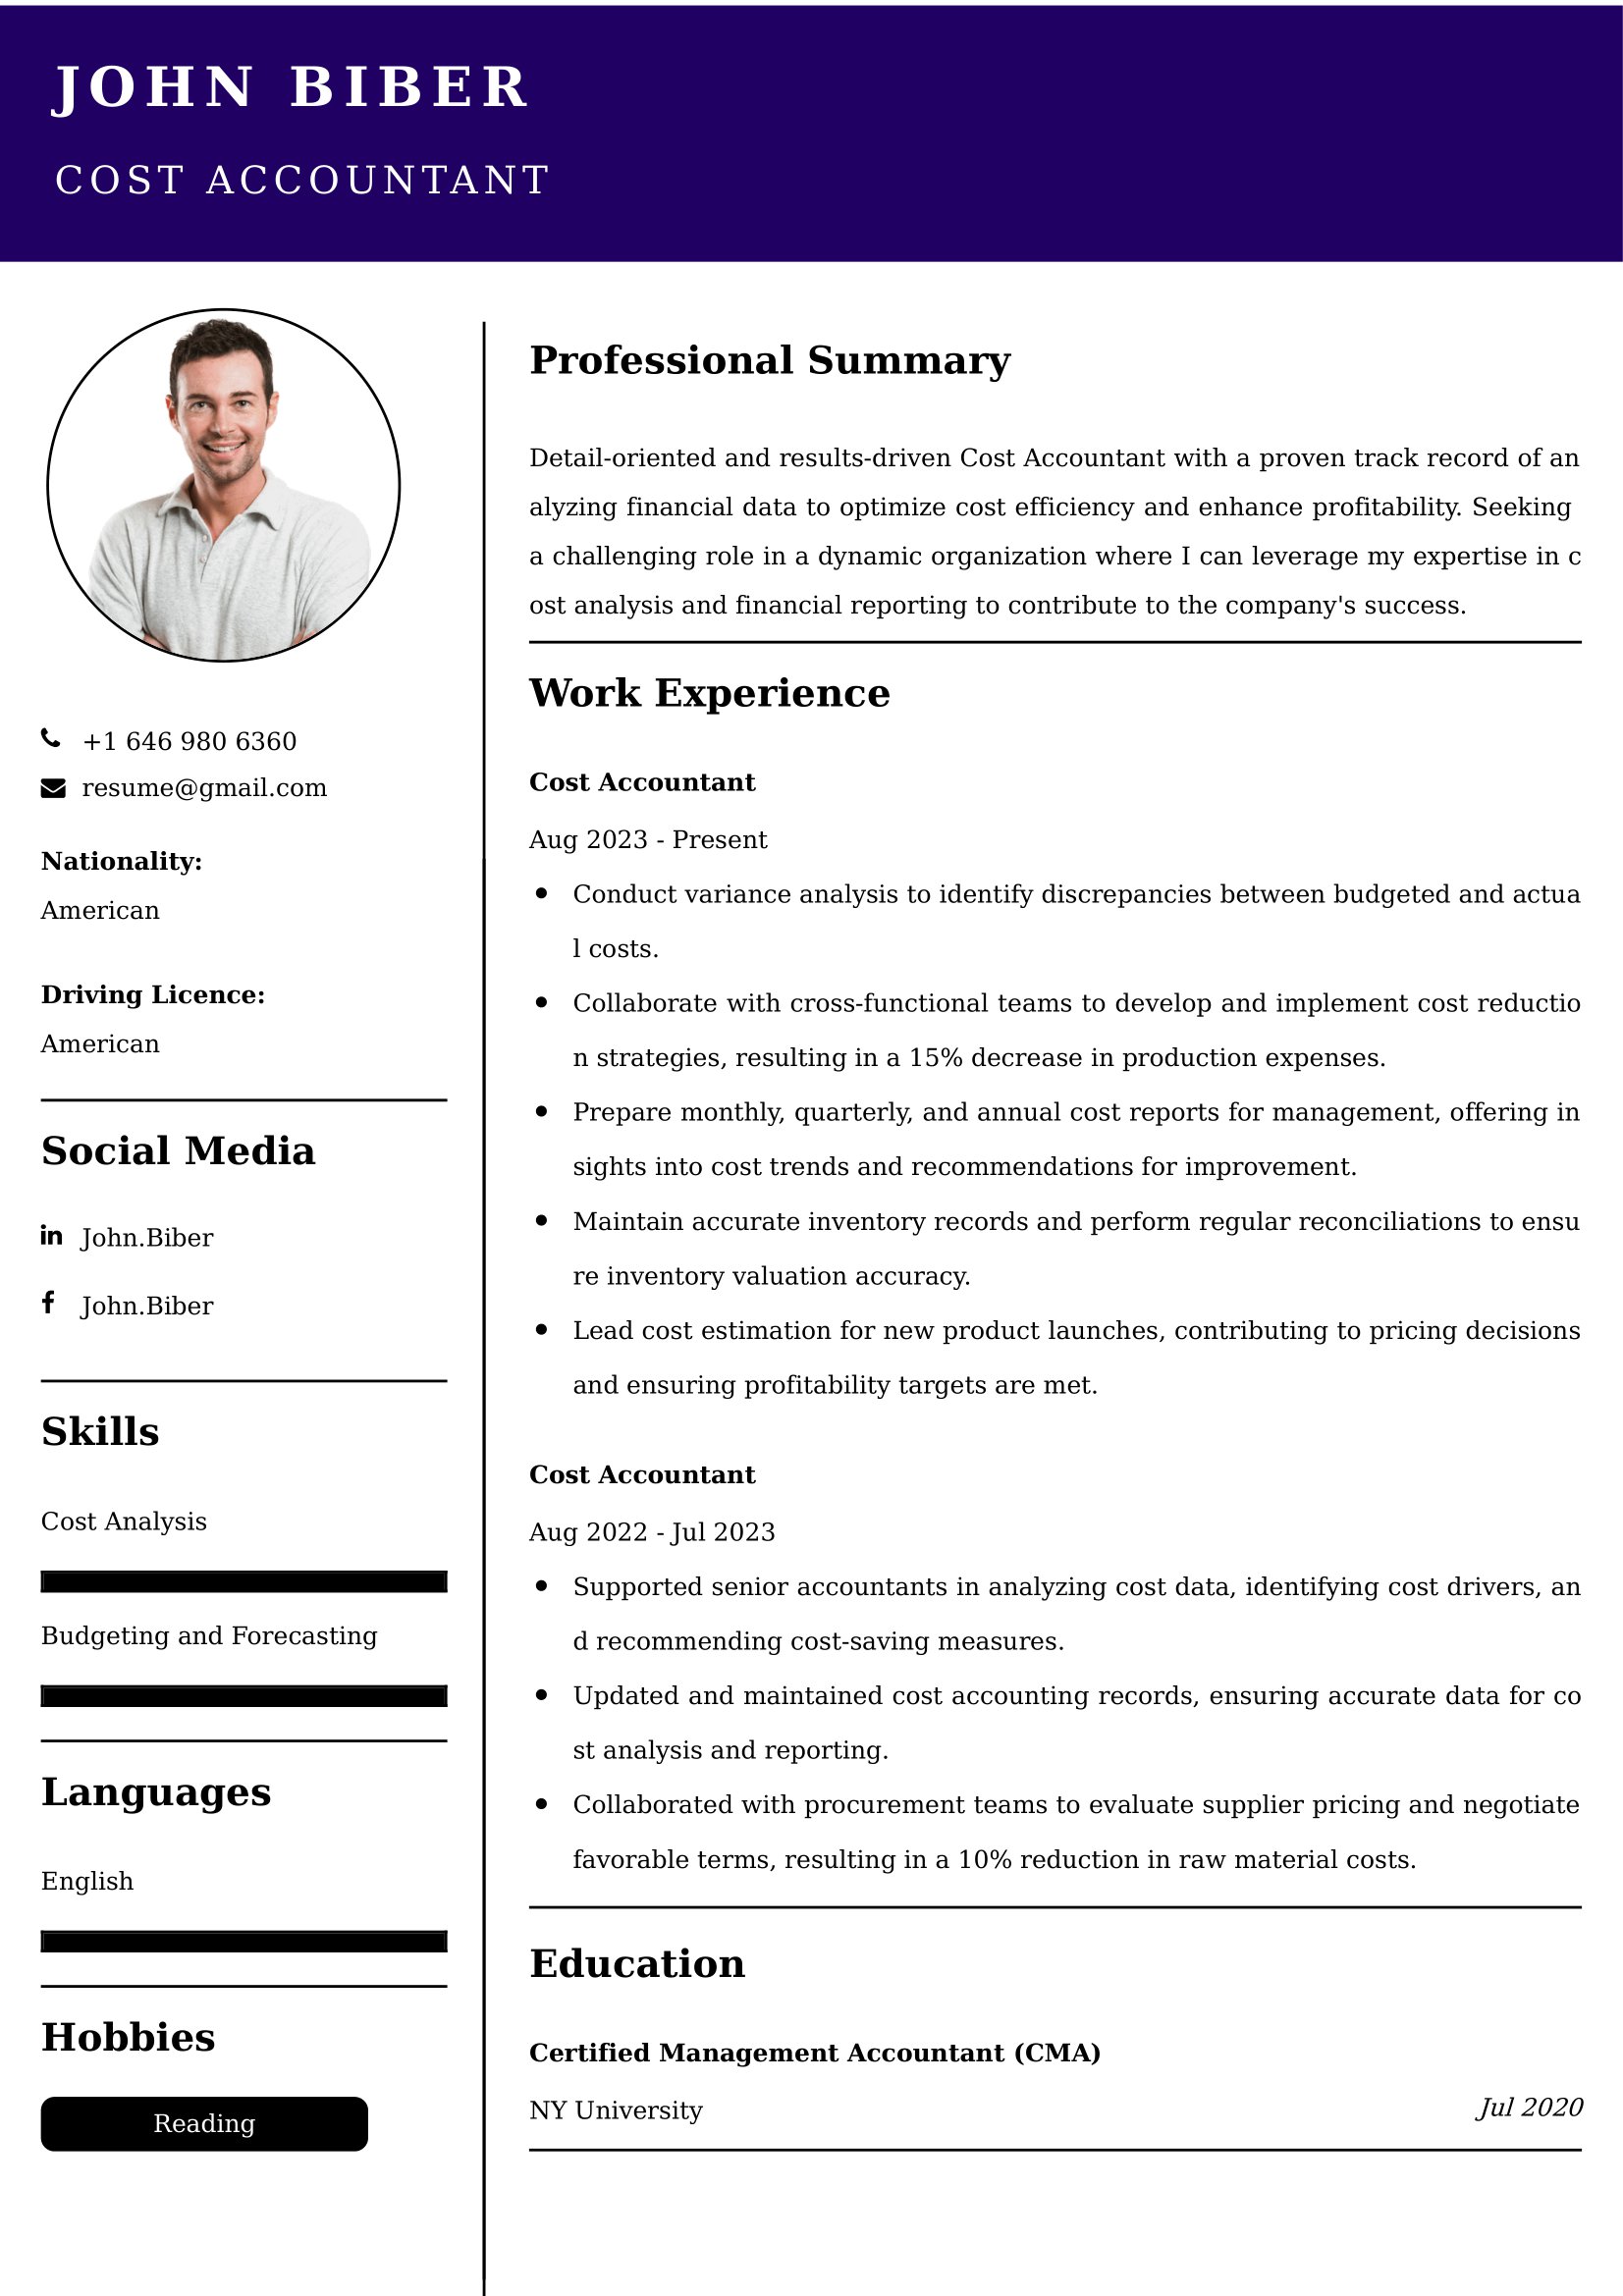 Cost Accountant Resume Examples - Brazilian Format, Latest Template